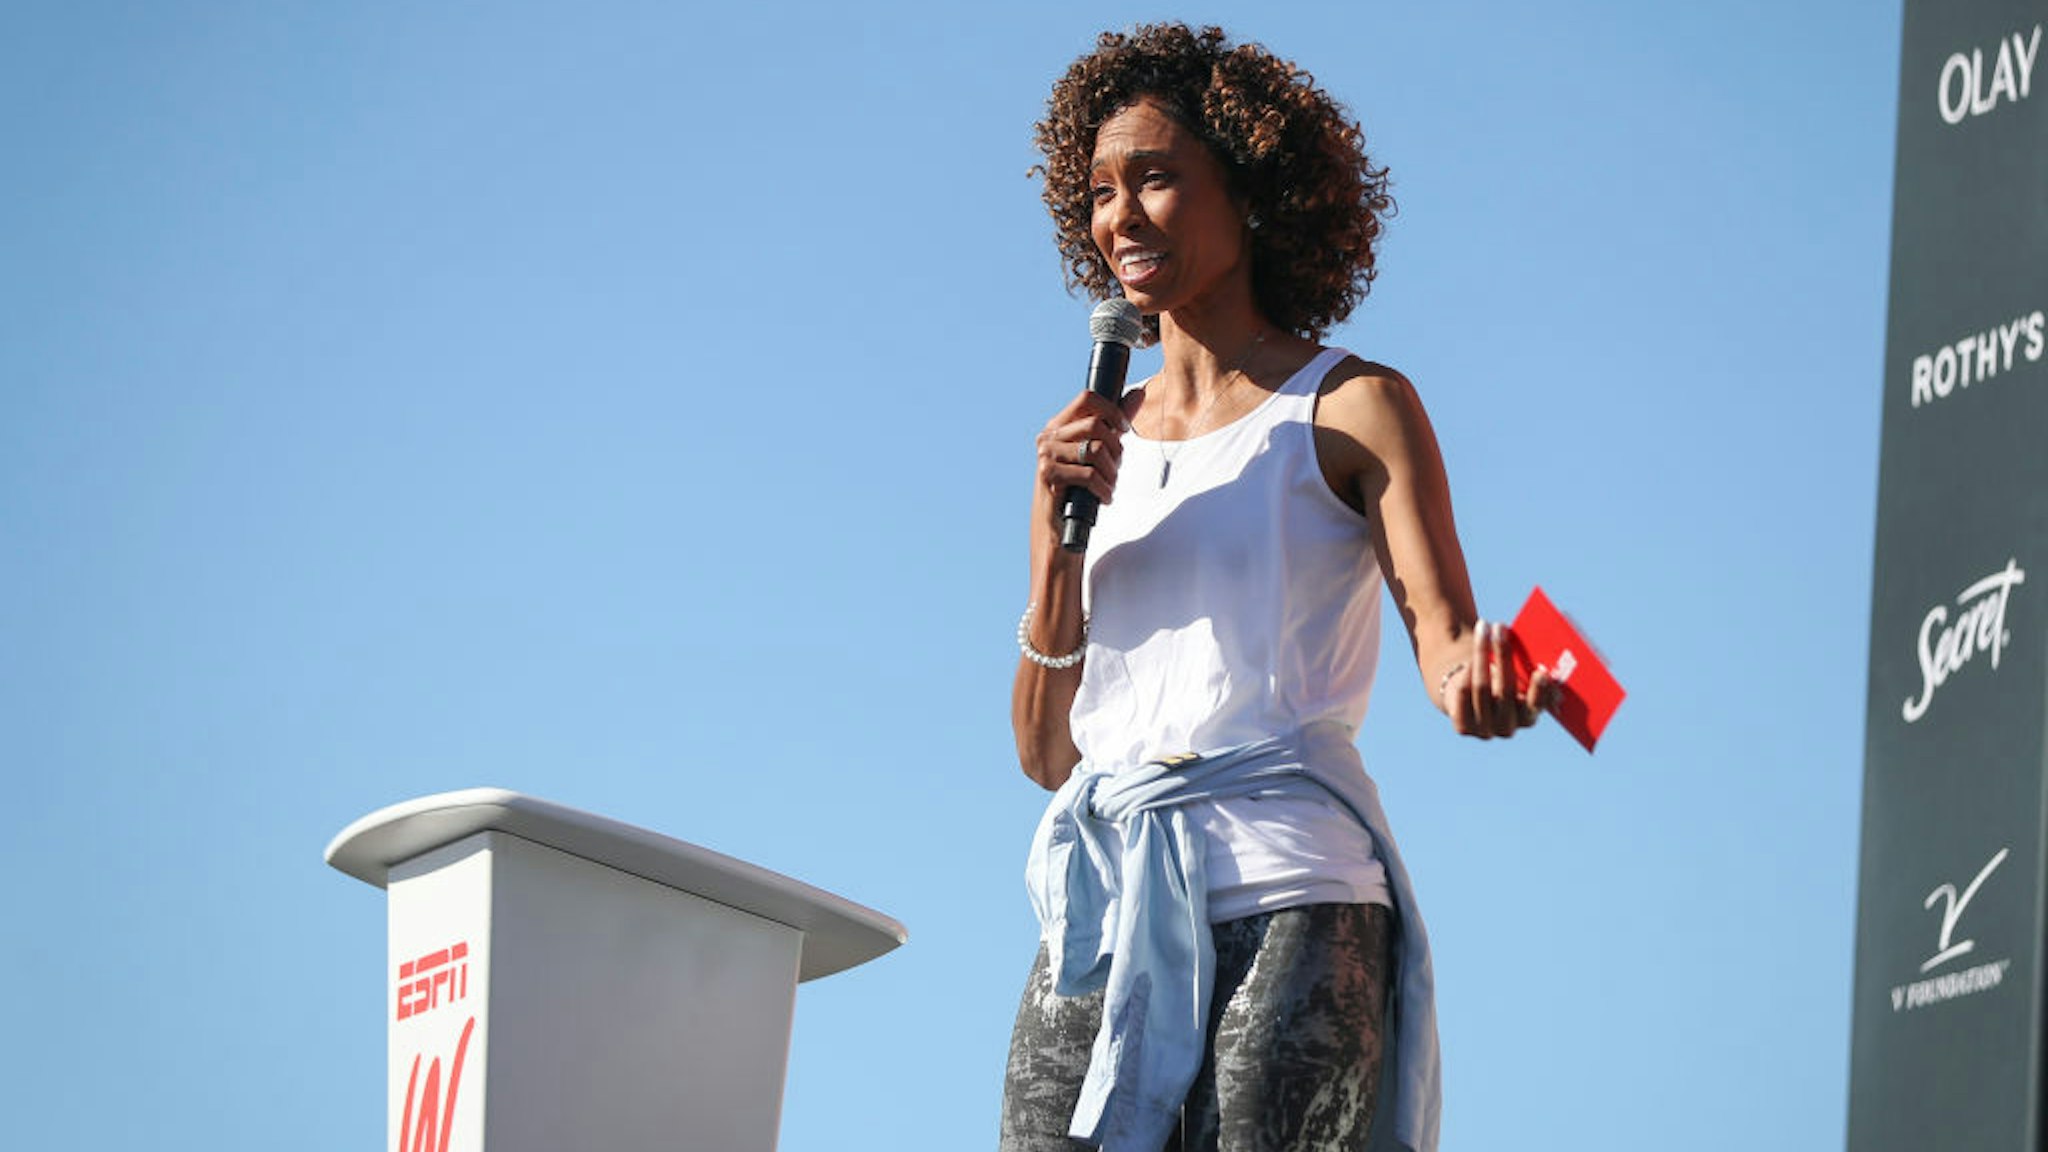 NEWPORT BEACH, CALIFORNIA - OCTOBER 23: SportsCenter anchor Sage Steele at the espnW Women + Sports Summit held at The Resort at Pelican Hill on October 23, 2019 in Newport Beach, California. (Photo by Meg Oliphant/Getty Images)